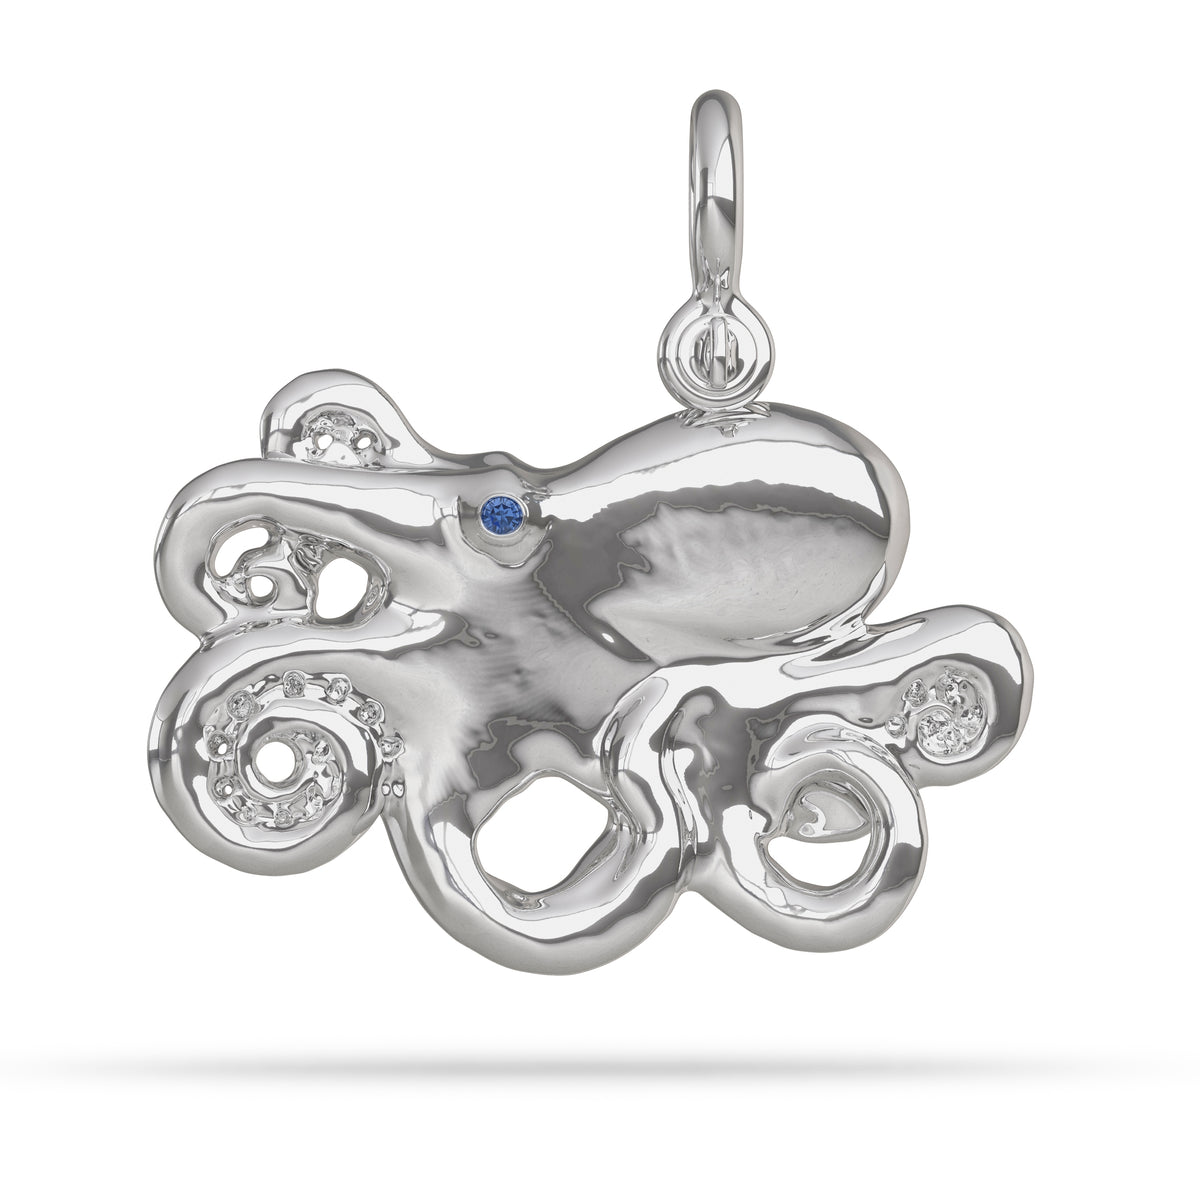 Solid Sterling Silver Octopus Pendant High Polished Mirror Finished Hung by Nautical Shackle Bail Custom Designed By Nautical Treasure Jewelry In The Florida Keys for My Teacher